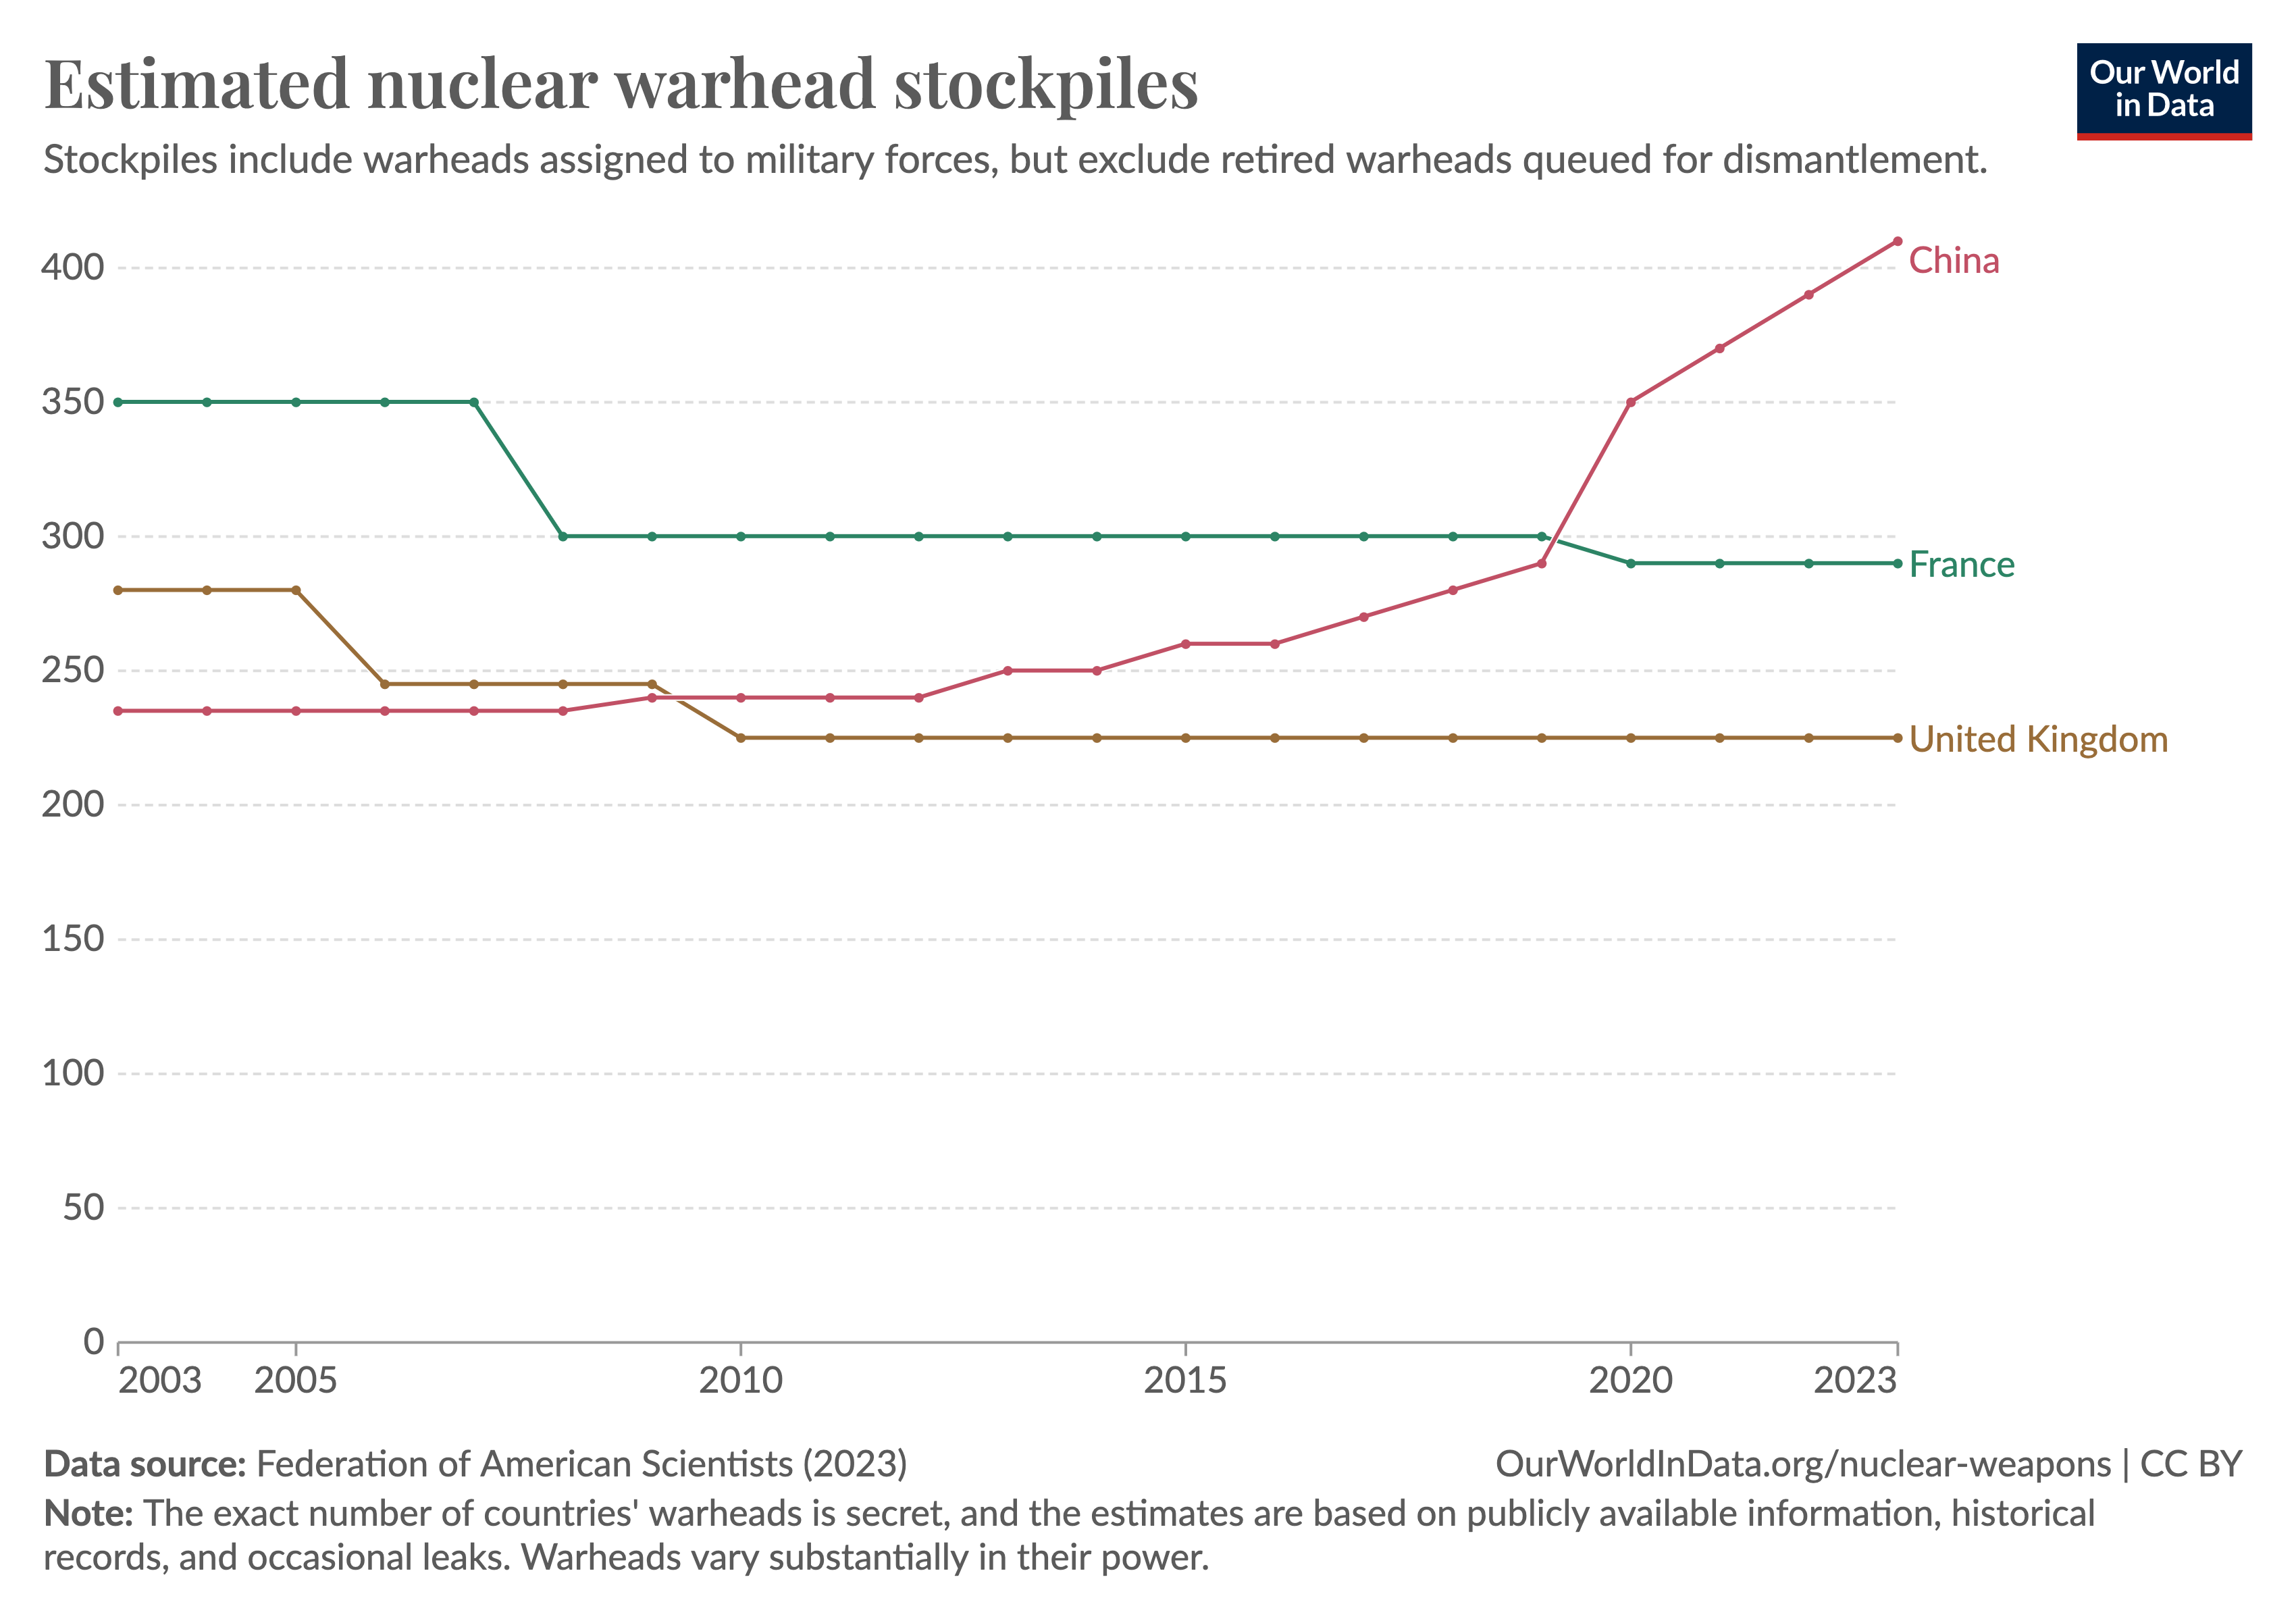 Line chart showing that China has been expanding the number of its nuclear warheads in the last twenty years, thereby overtaking France and the United Kingdom, which have slightly reduced theirs.